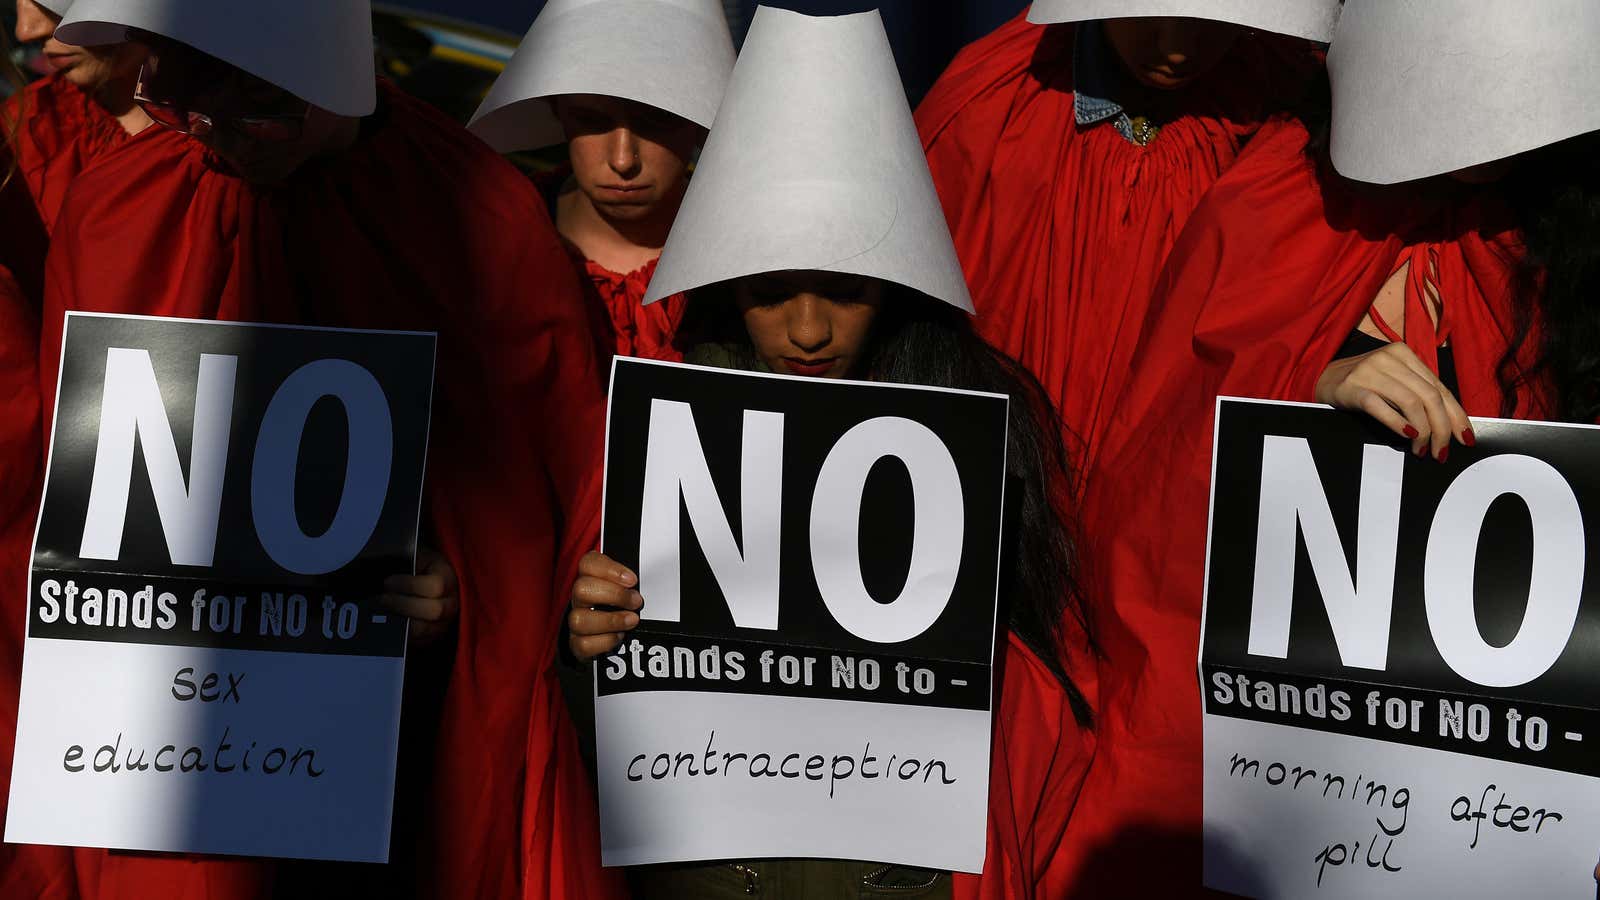 The handmaid’s costume has been co-opted as a symbol of female agency and protest around the world.